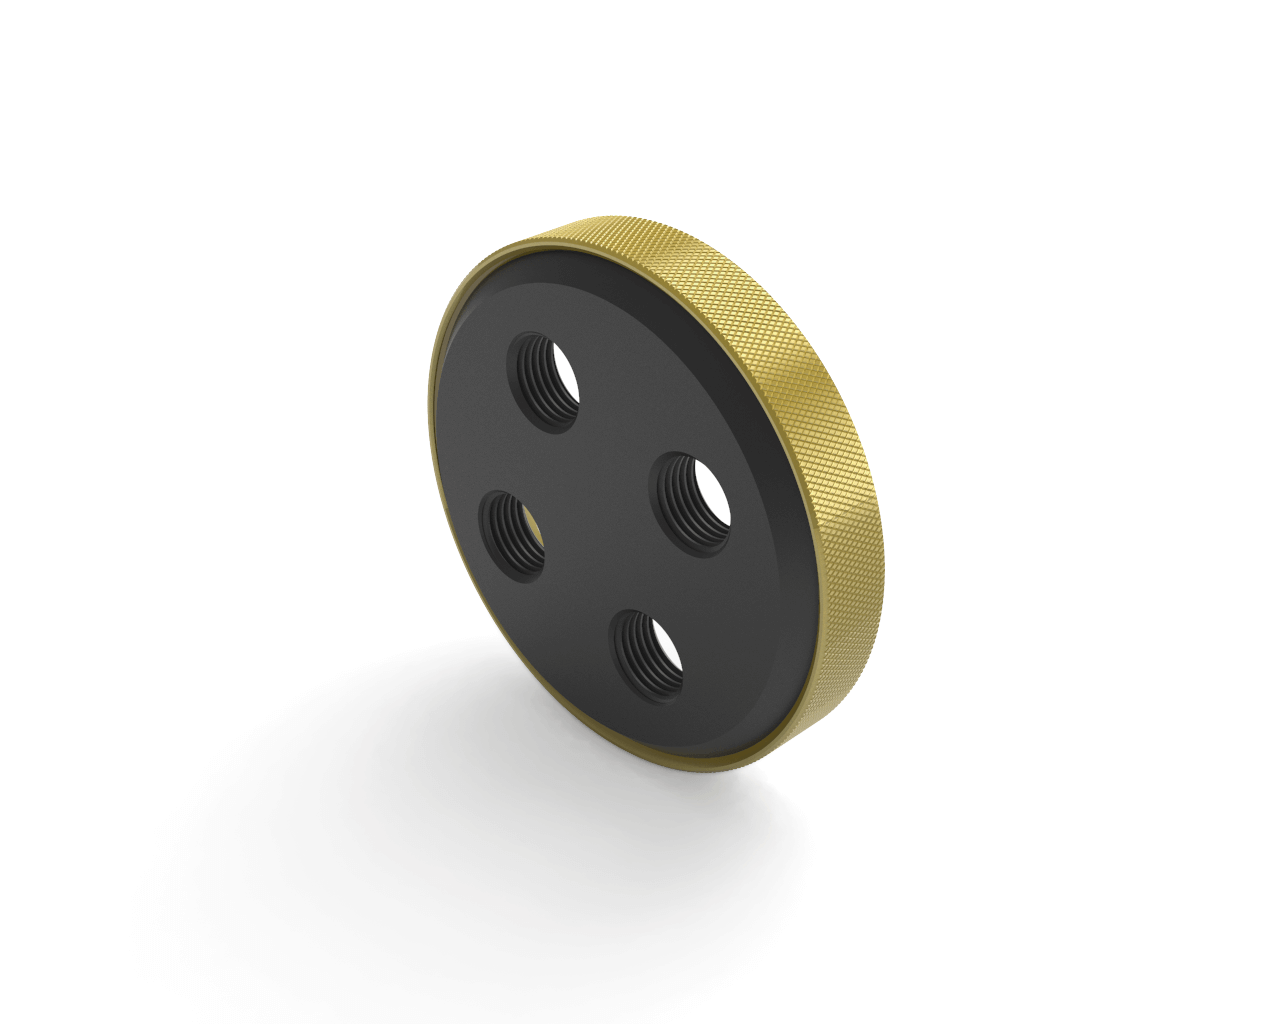 PrimoChill CTR Replacement SX Compression Ring - PrimoChill - KEEPING IT COOL Candy Gold